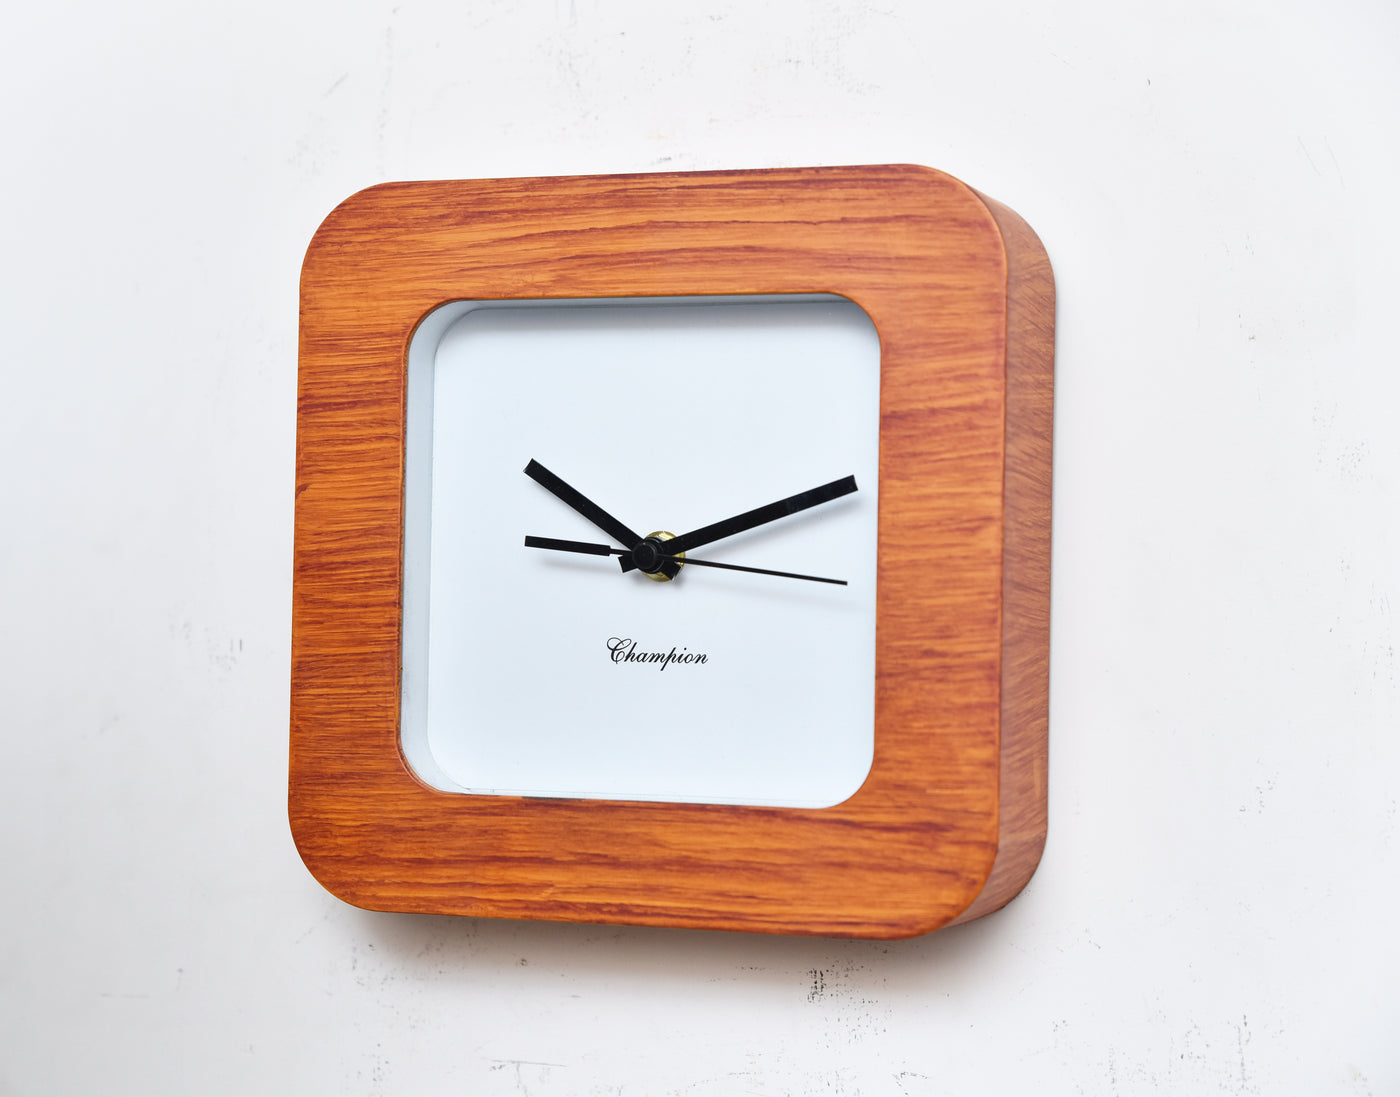 Champion White Dial Ply-Wood Square Table Clock For Decor